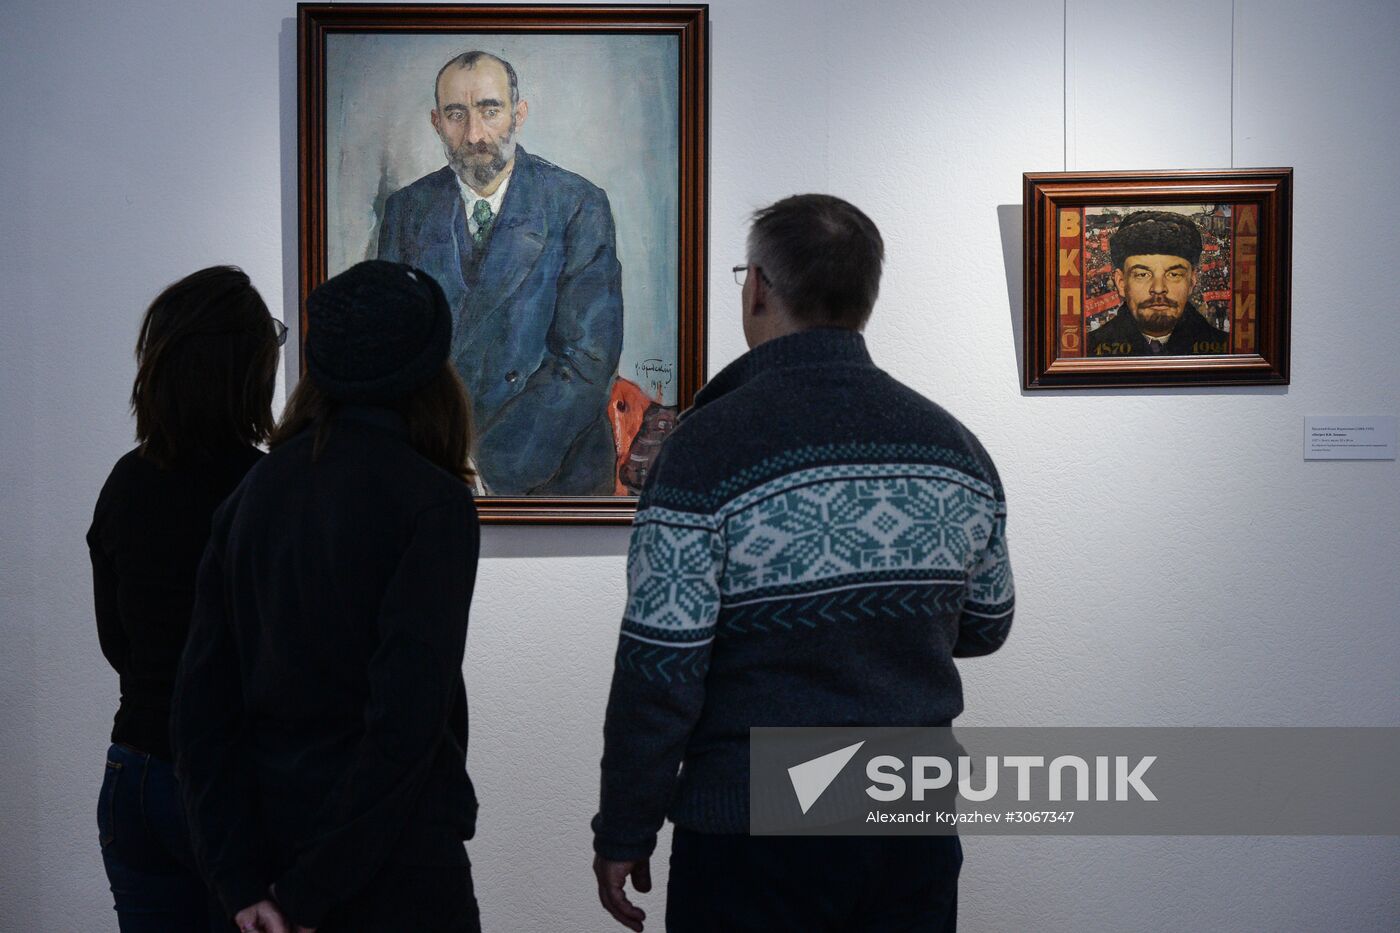 Exhibition "Event that shook the world" opens in Novosibirsk